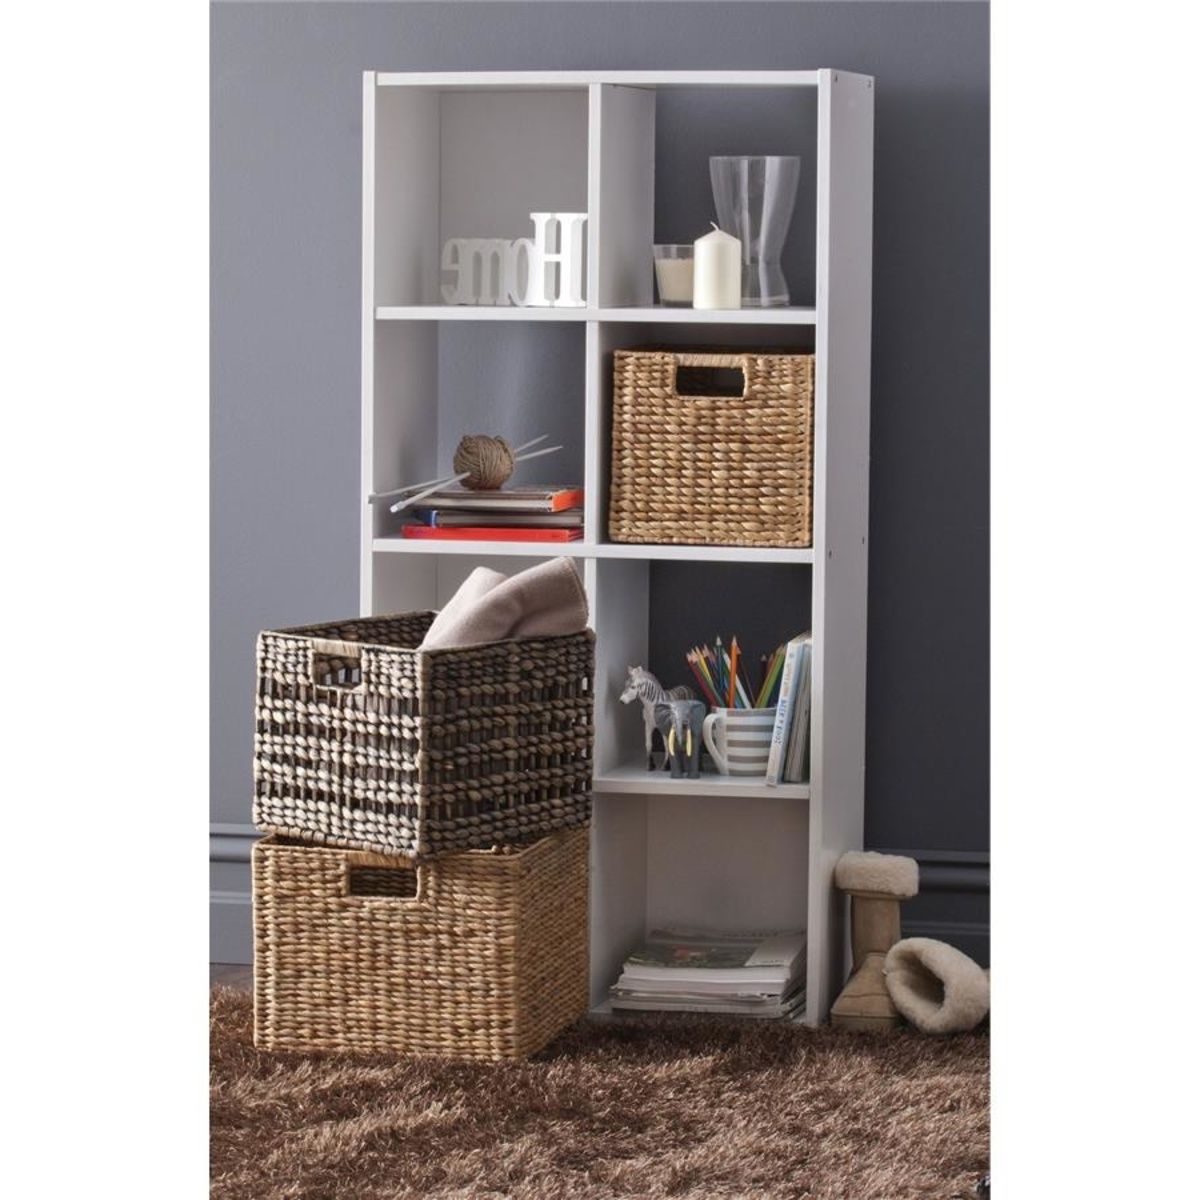 Most Recently Released Furniture Home: Phenomenal Kmart Bookcases Picture Ideas Stunning Inside Kmart Bookcases (View 1 of 15)